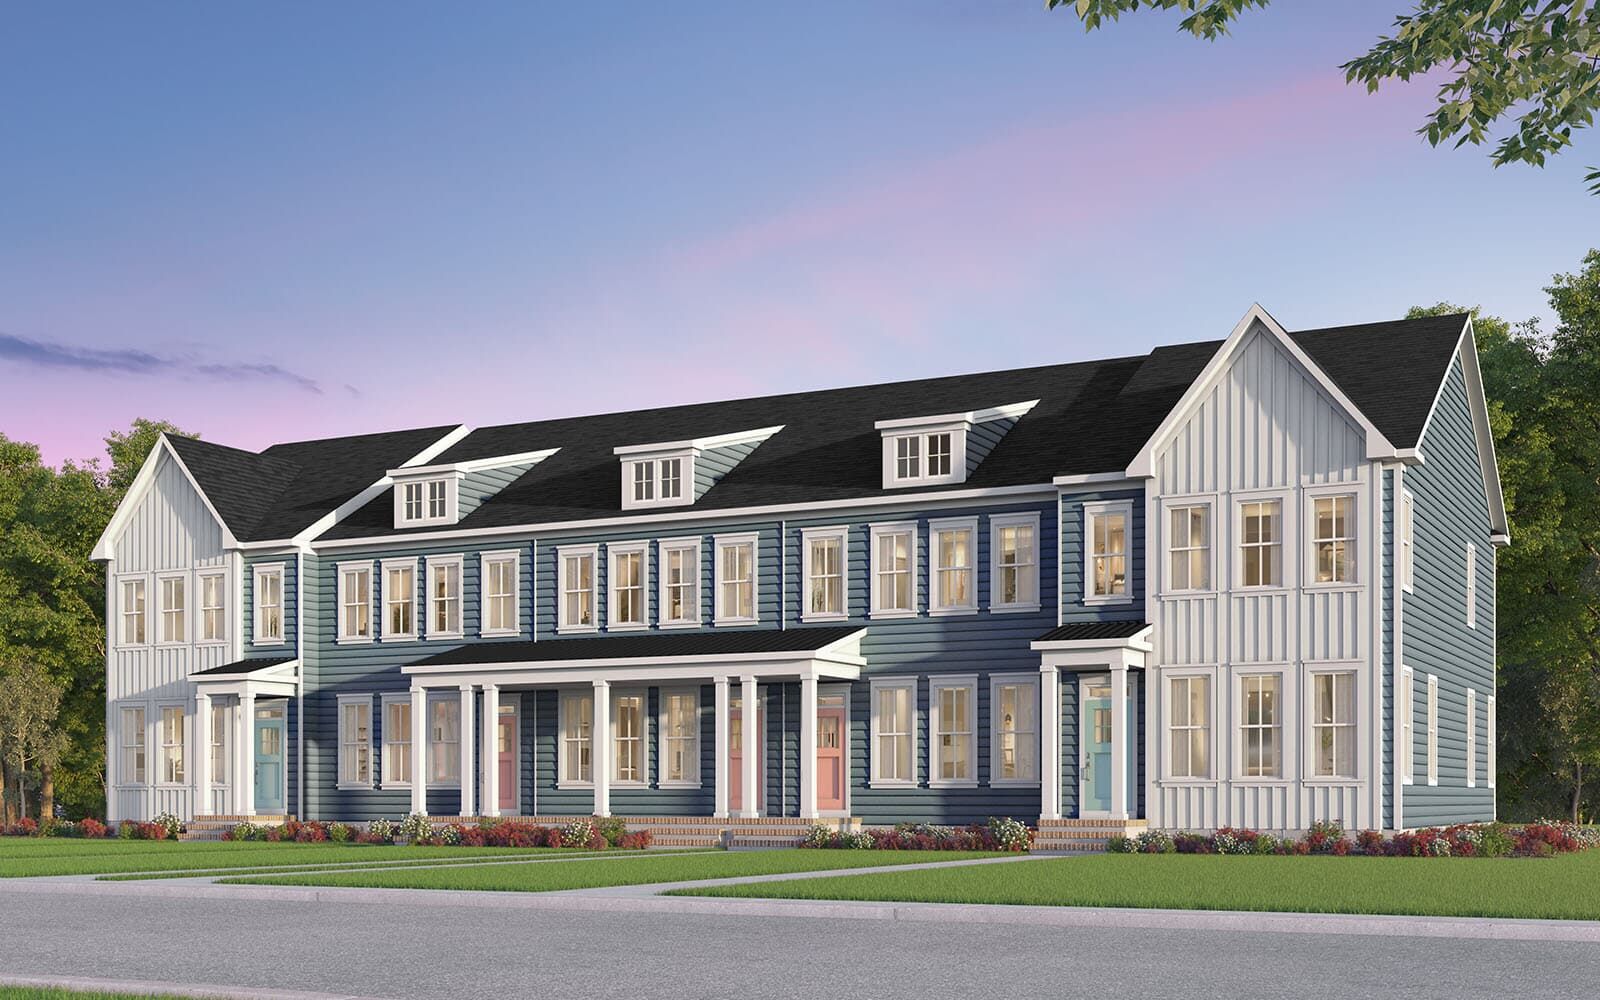 Sage Exterior:A rendering of the exterior of the Sage townhome at Nexton by Brookfield Residential